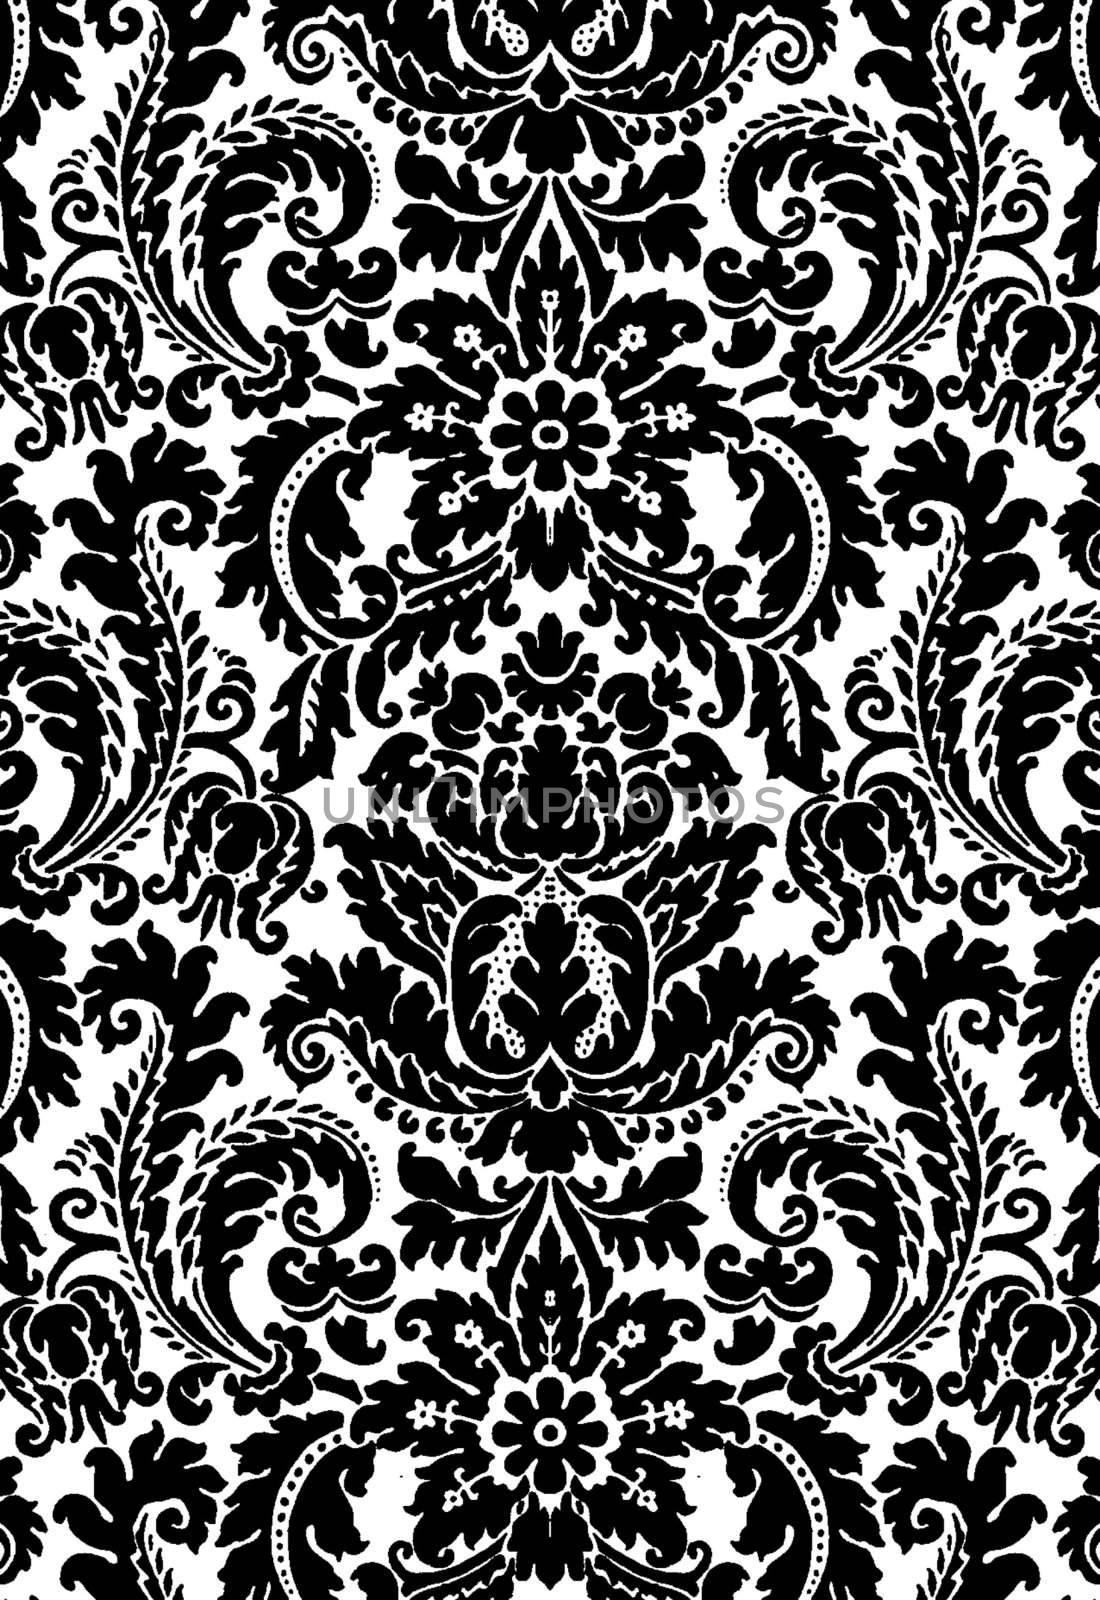 Floral monochrome background illustration by fotosergio